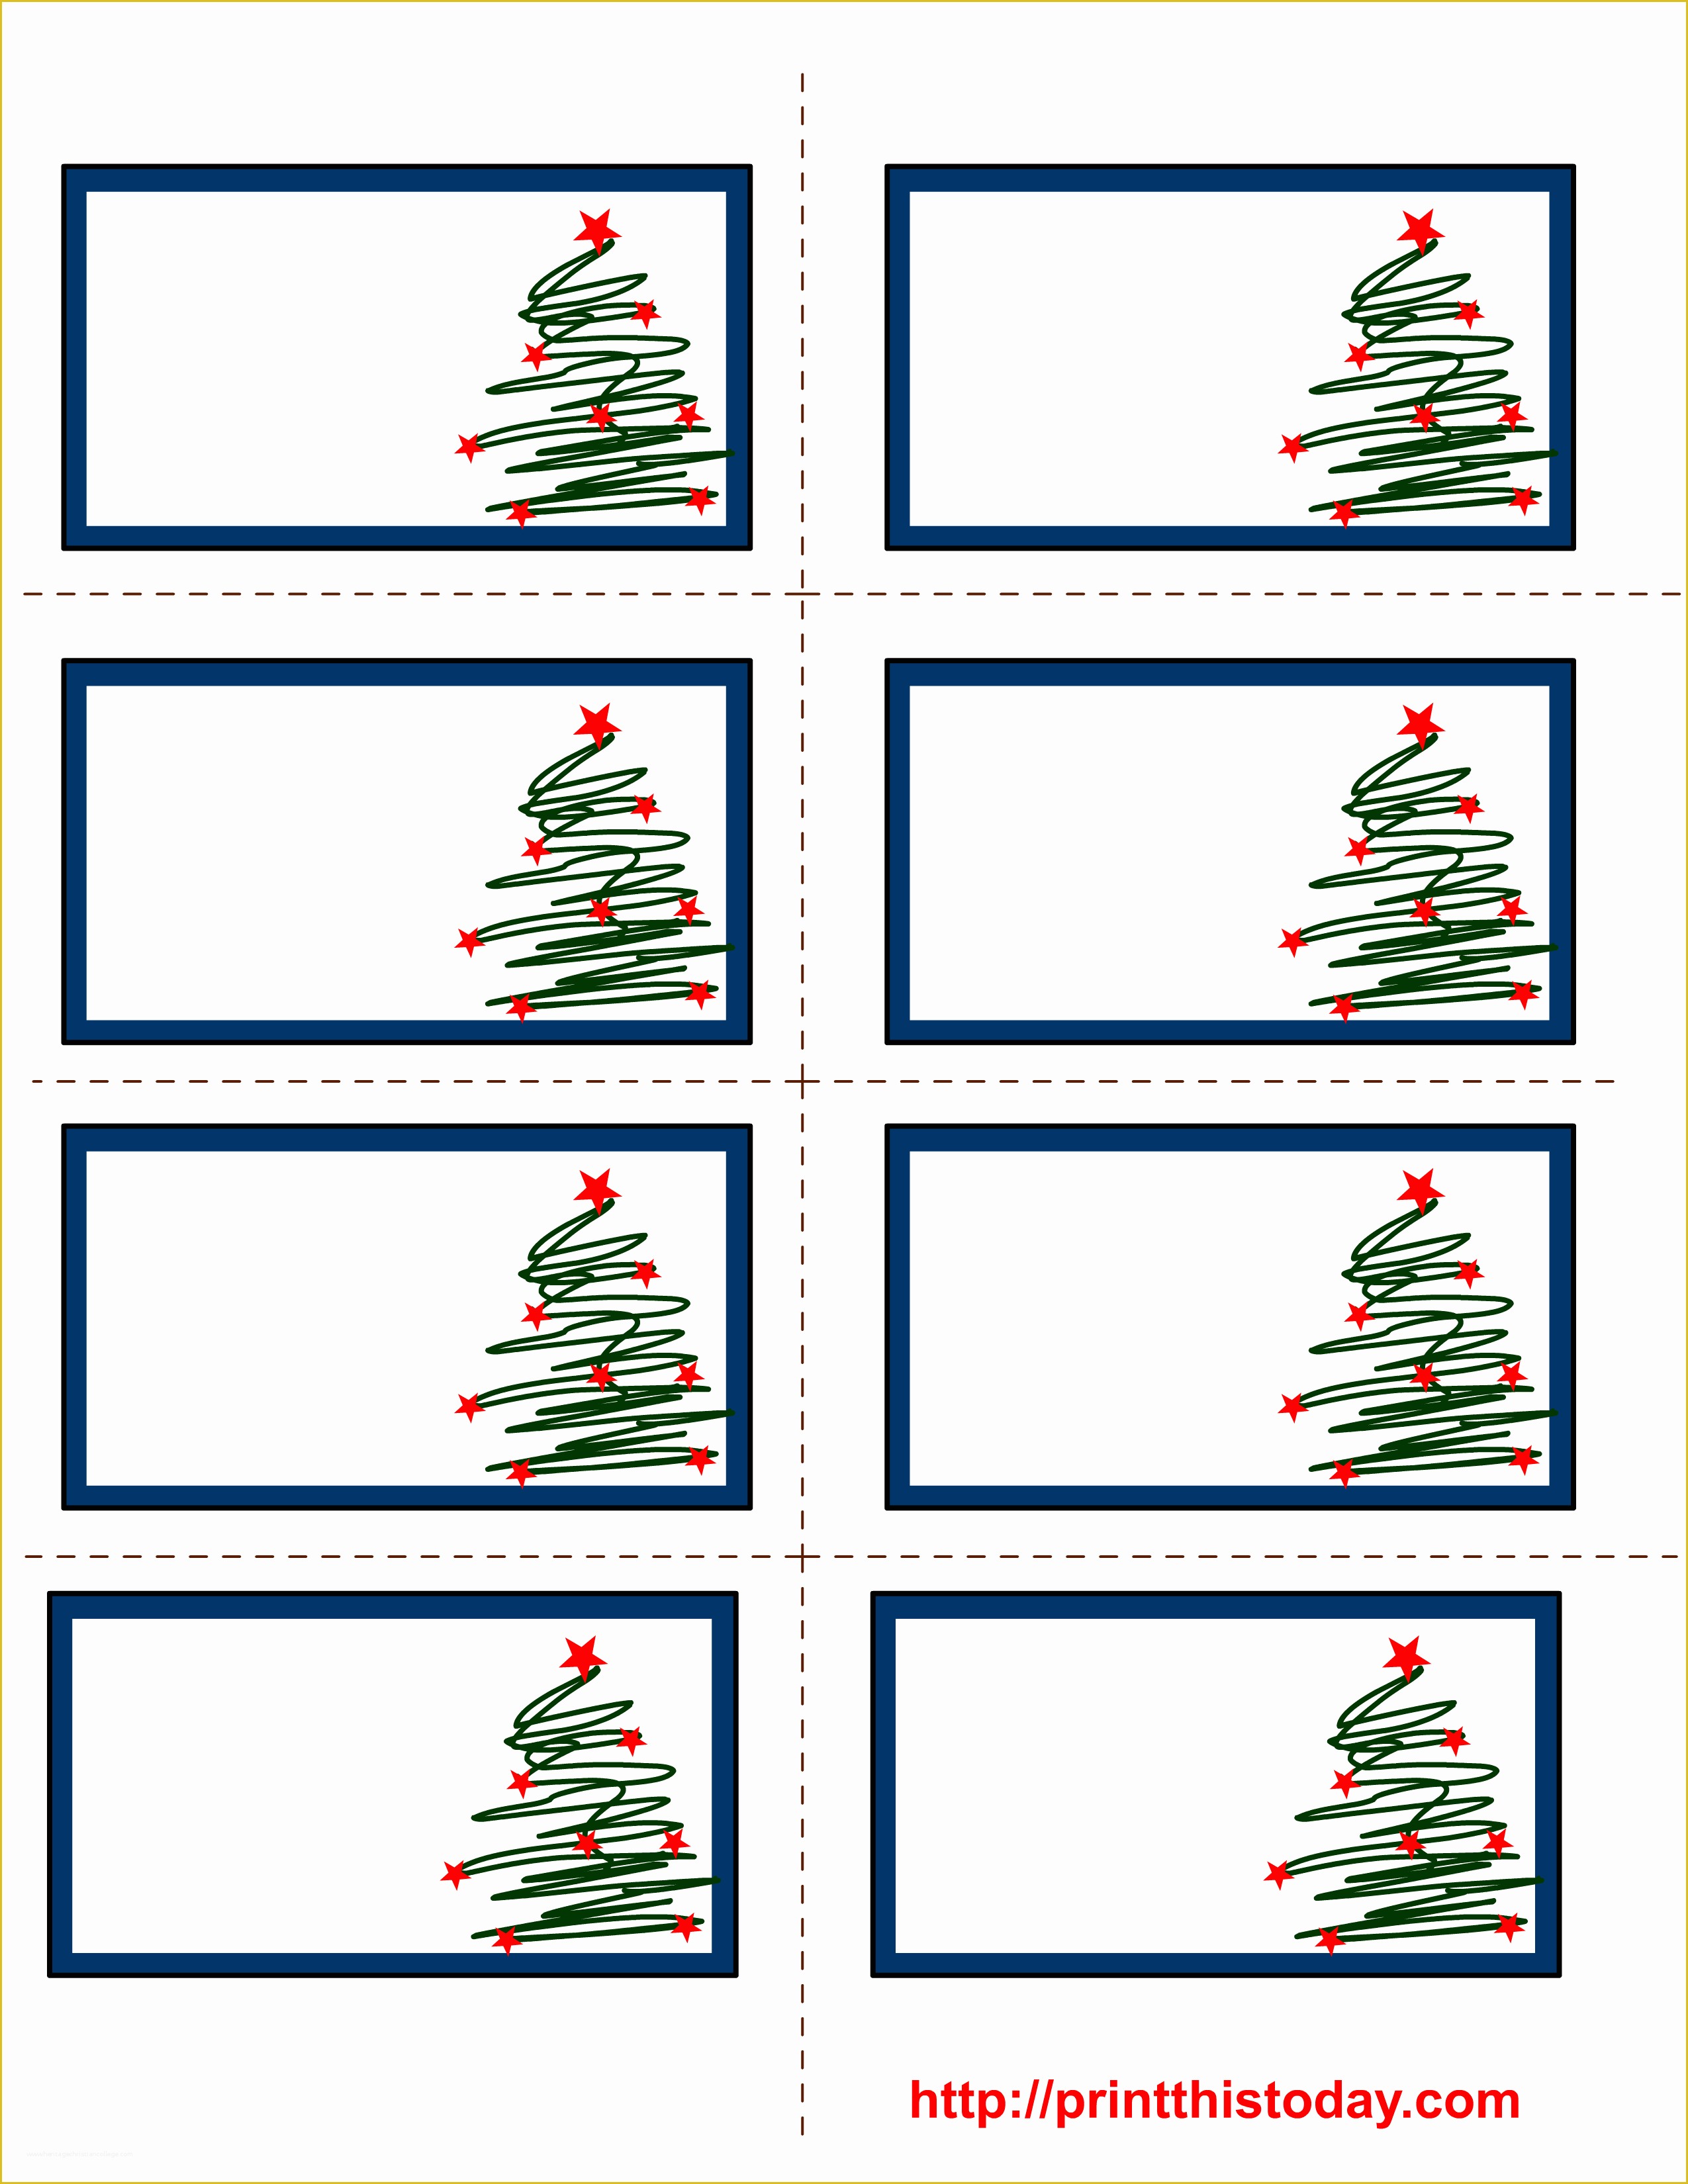 free-christmas-return-address-label-templates-30-per-sheet-of-staples-mailing-labels-5160-made